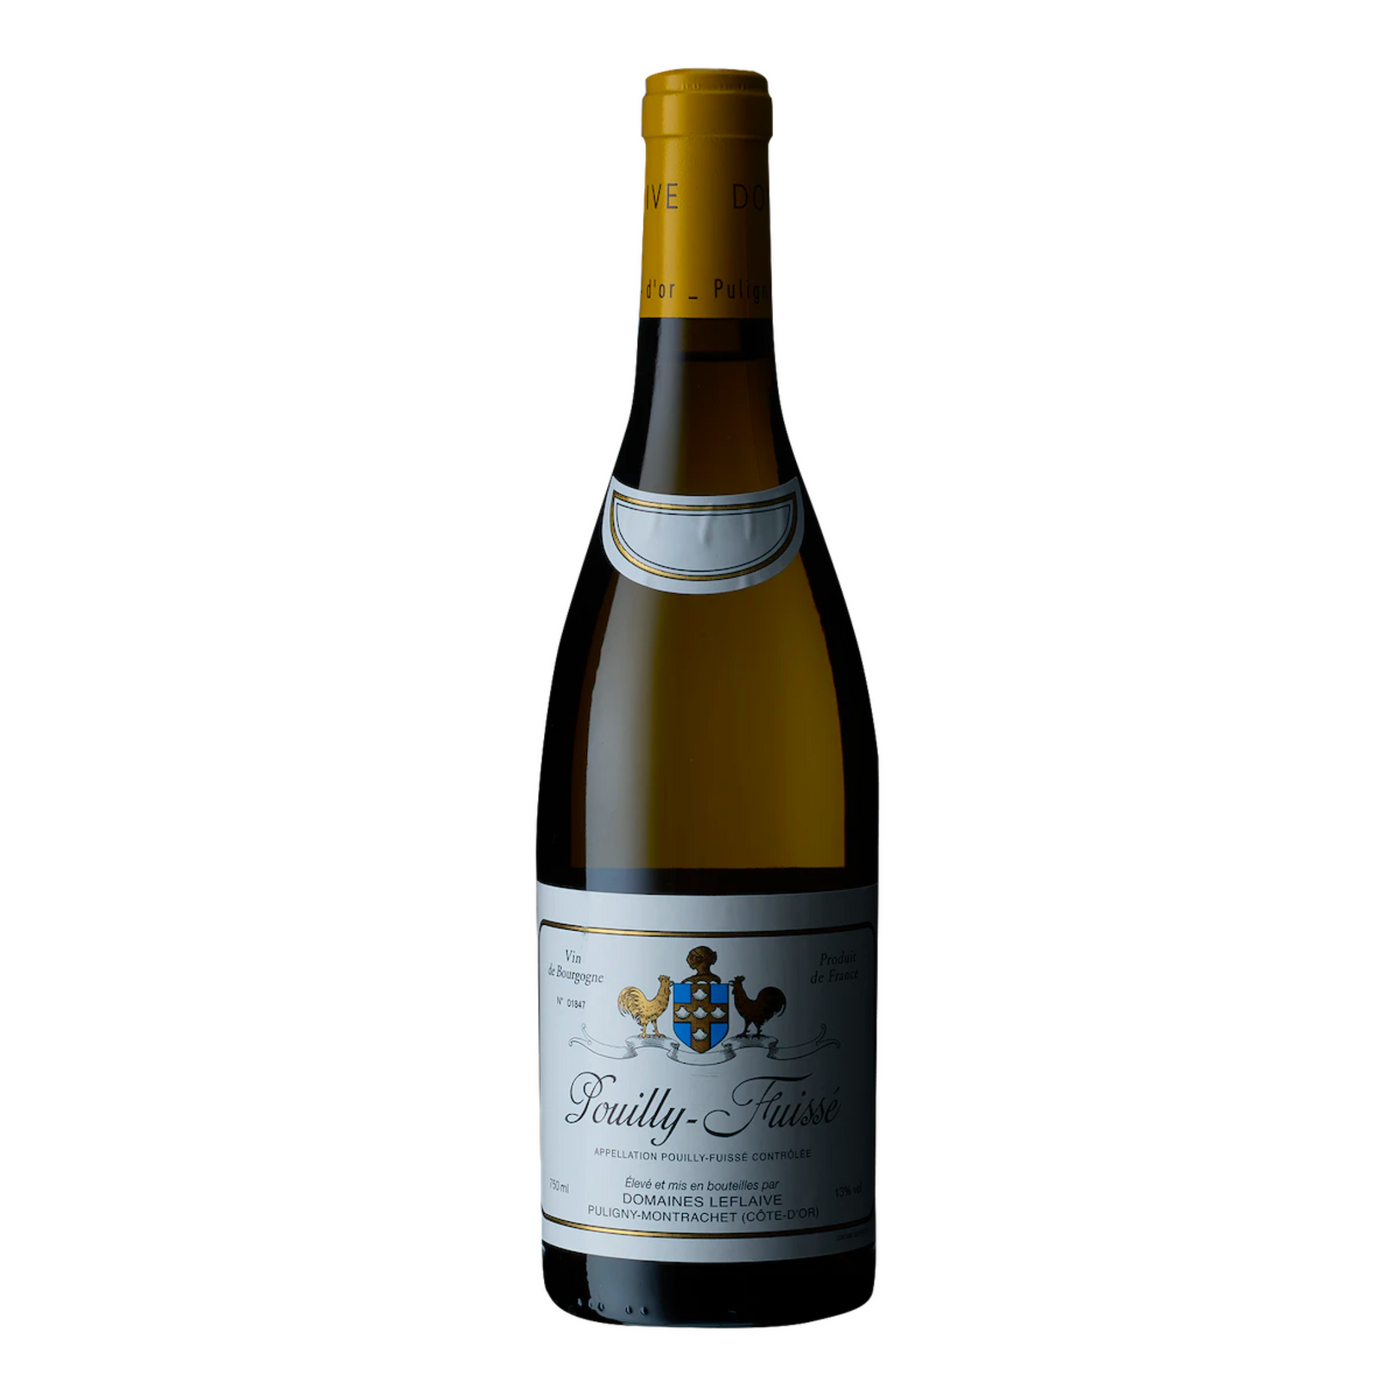 Domaine Leflaive Pouilly-Fuisse 2019